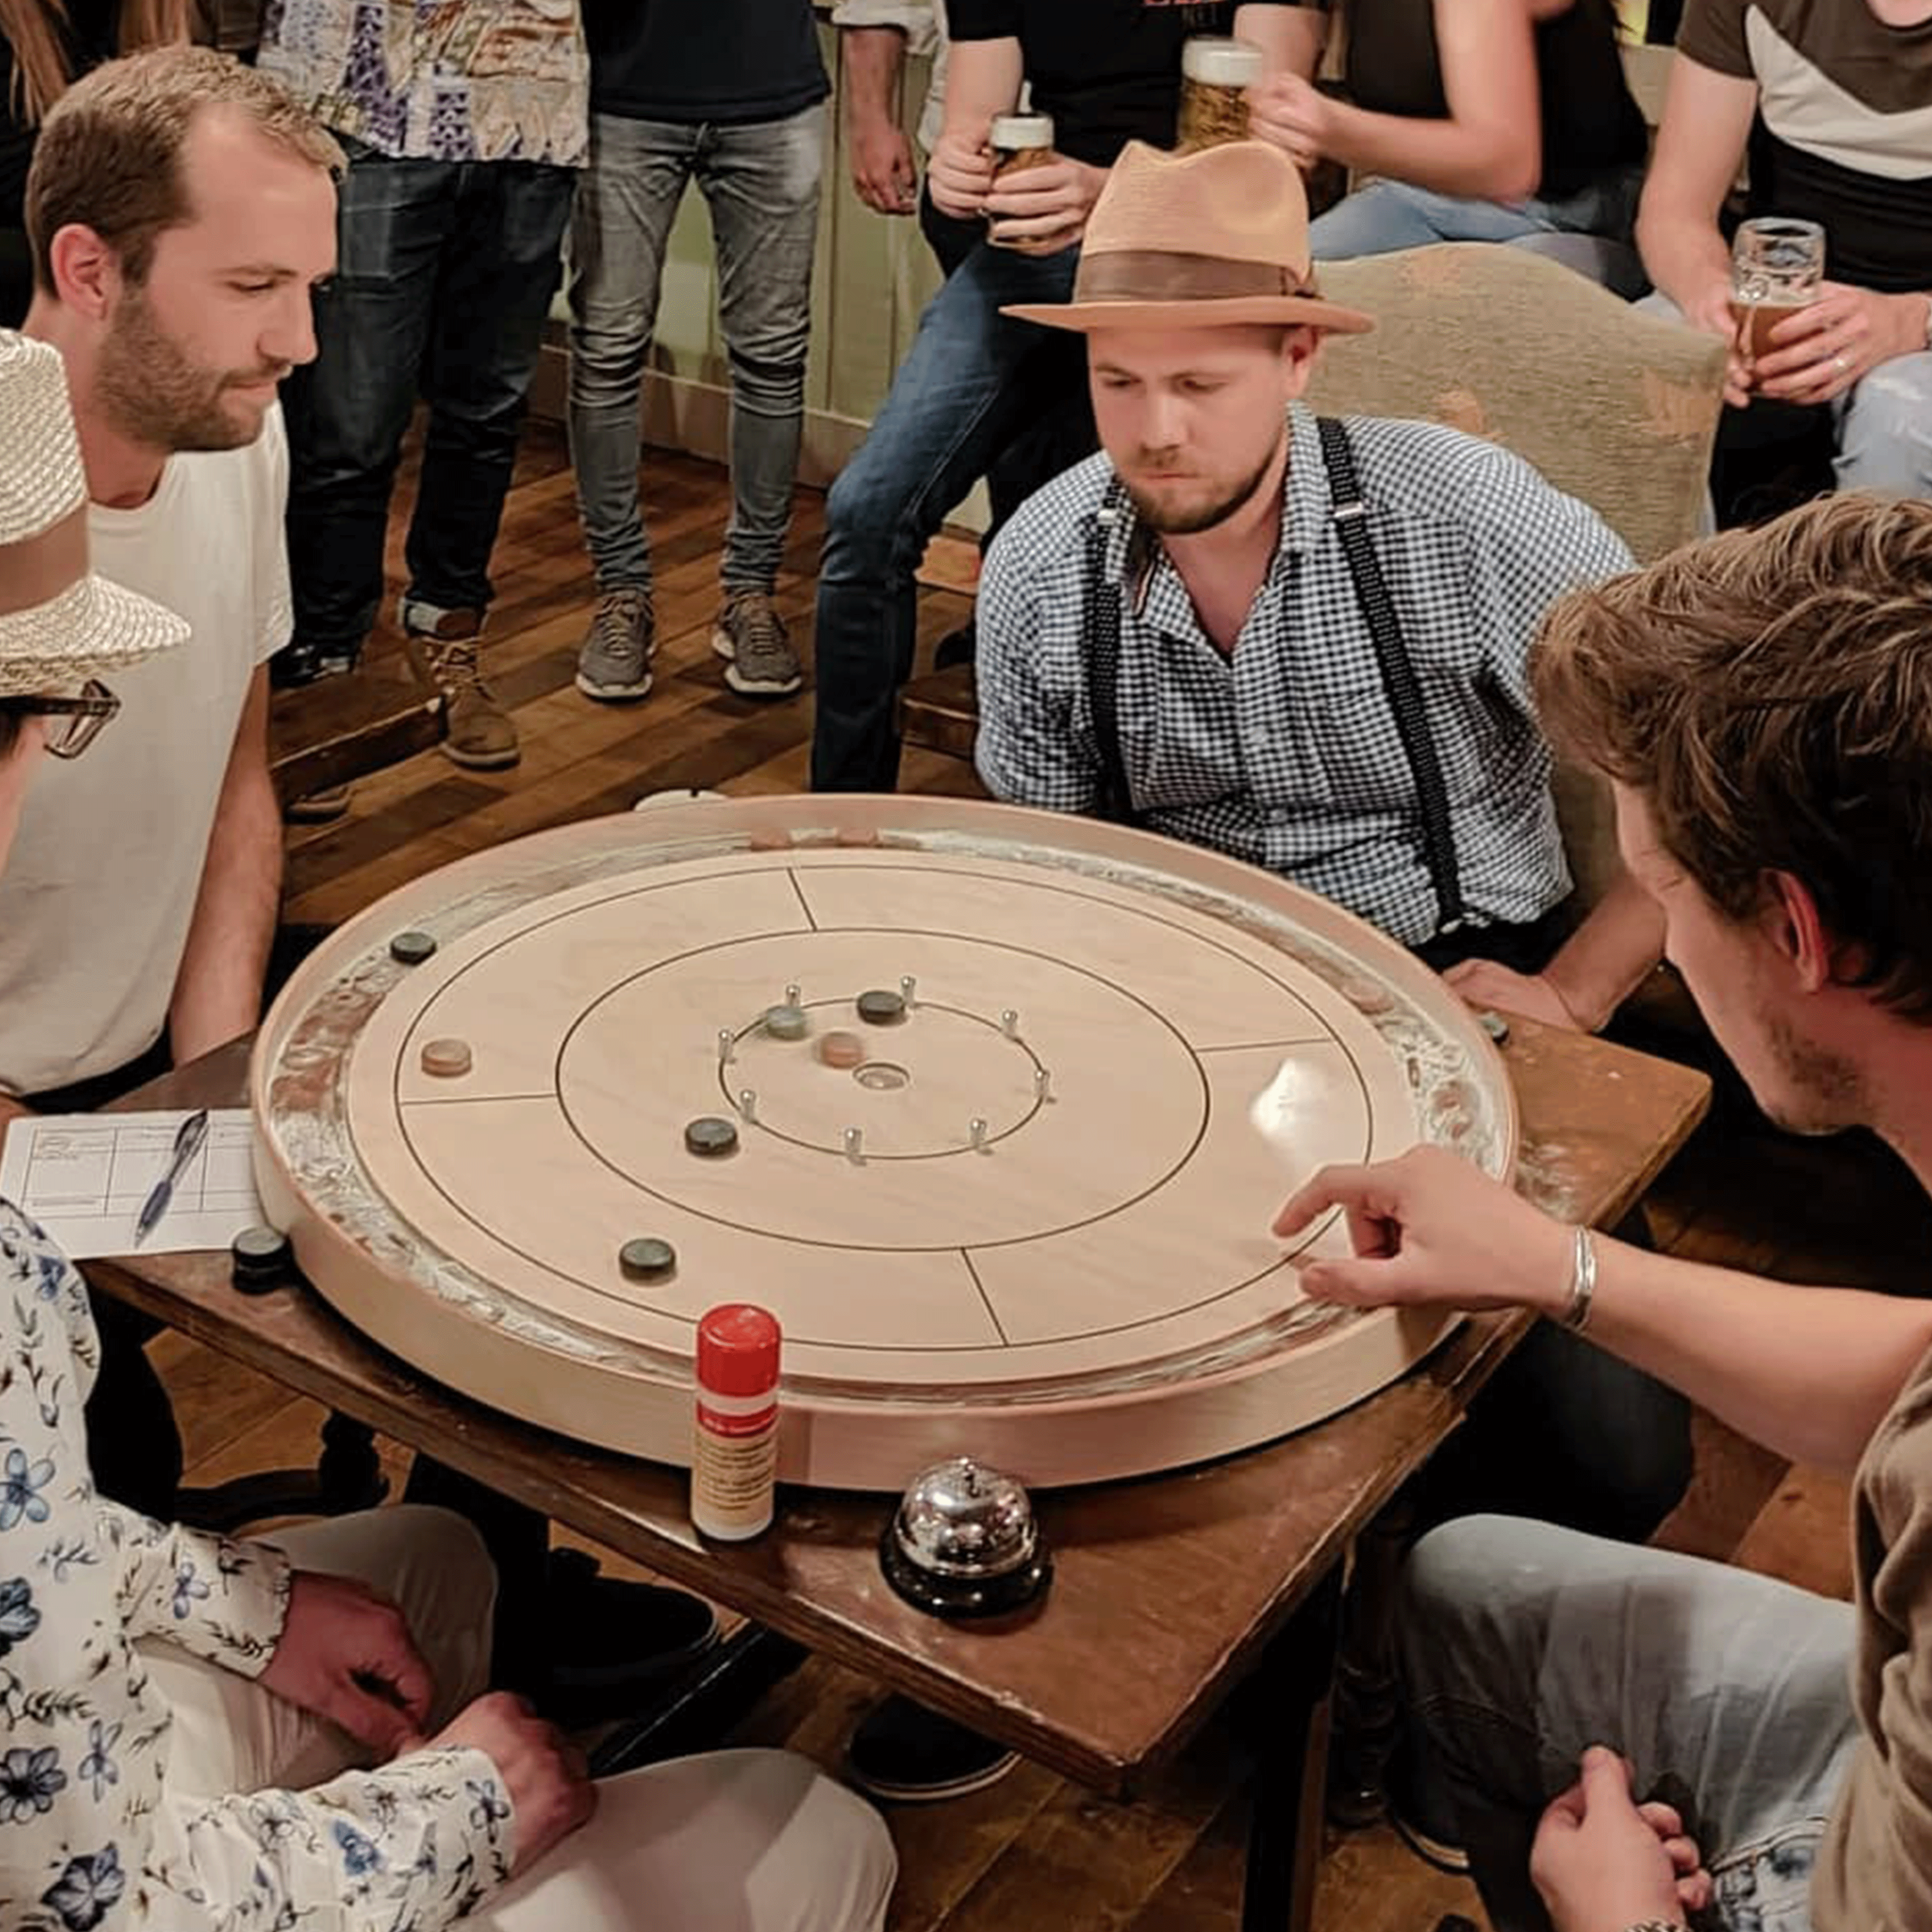 Load video: How to play Crokinole